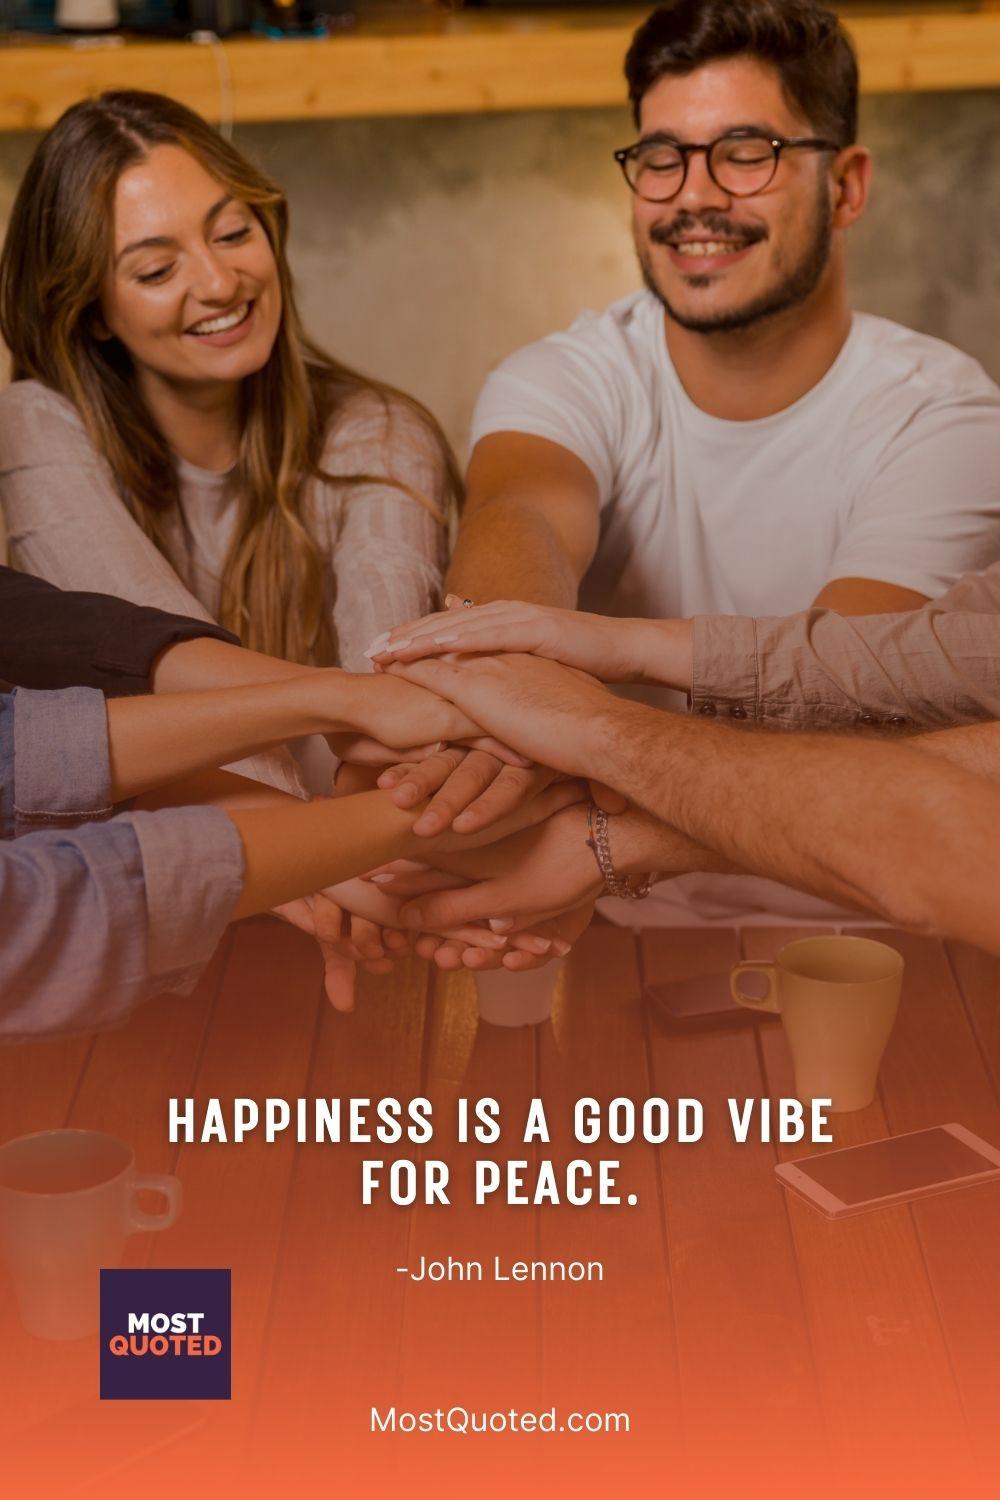 Happiness is a good vibe for peace. - John Lennon